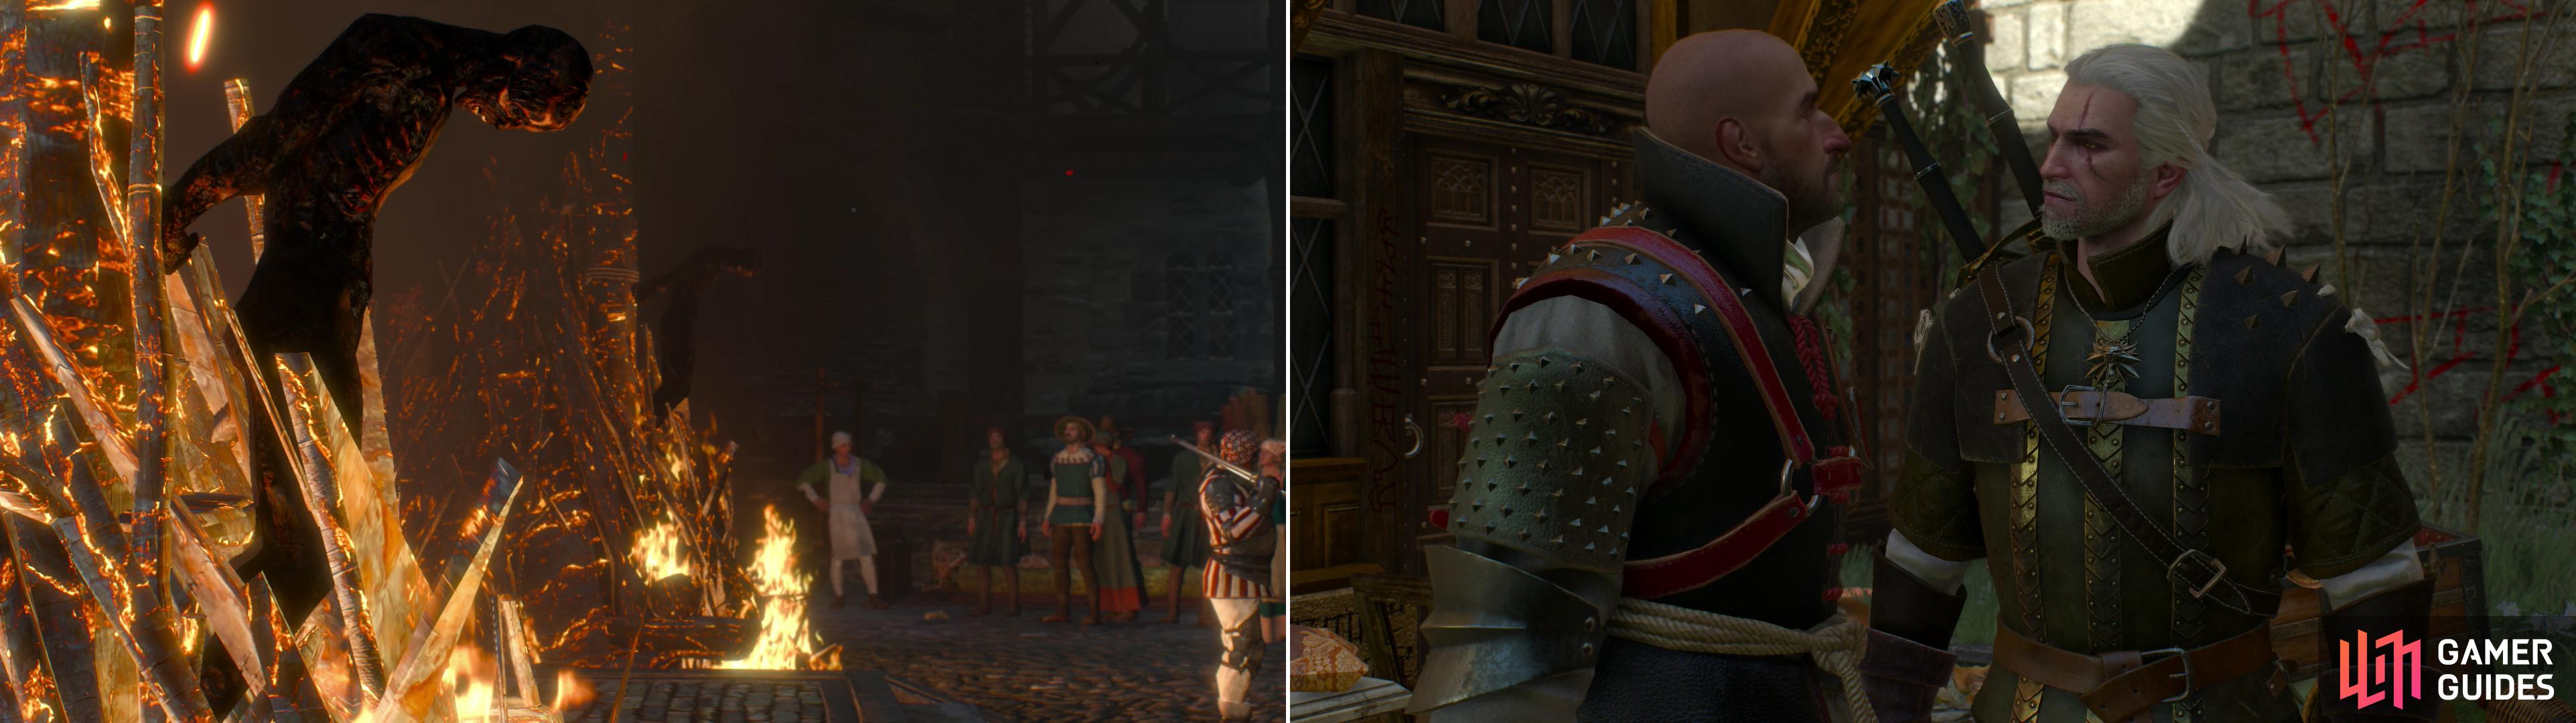 The Cult of the Eternal Fire has made Novigrad a dangerous place for mages and other magical "deviants" (left). Menge, the leader of the city's Witch Hunters, is a particularly unlikable fellow (right).